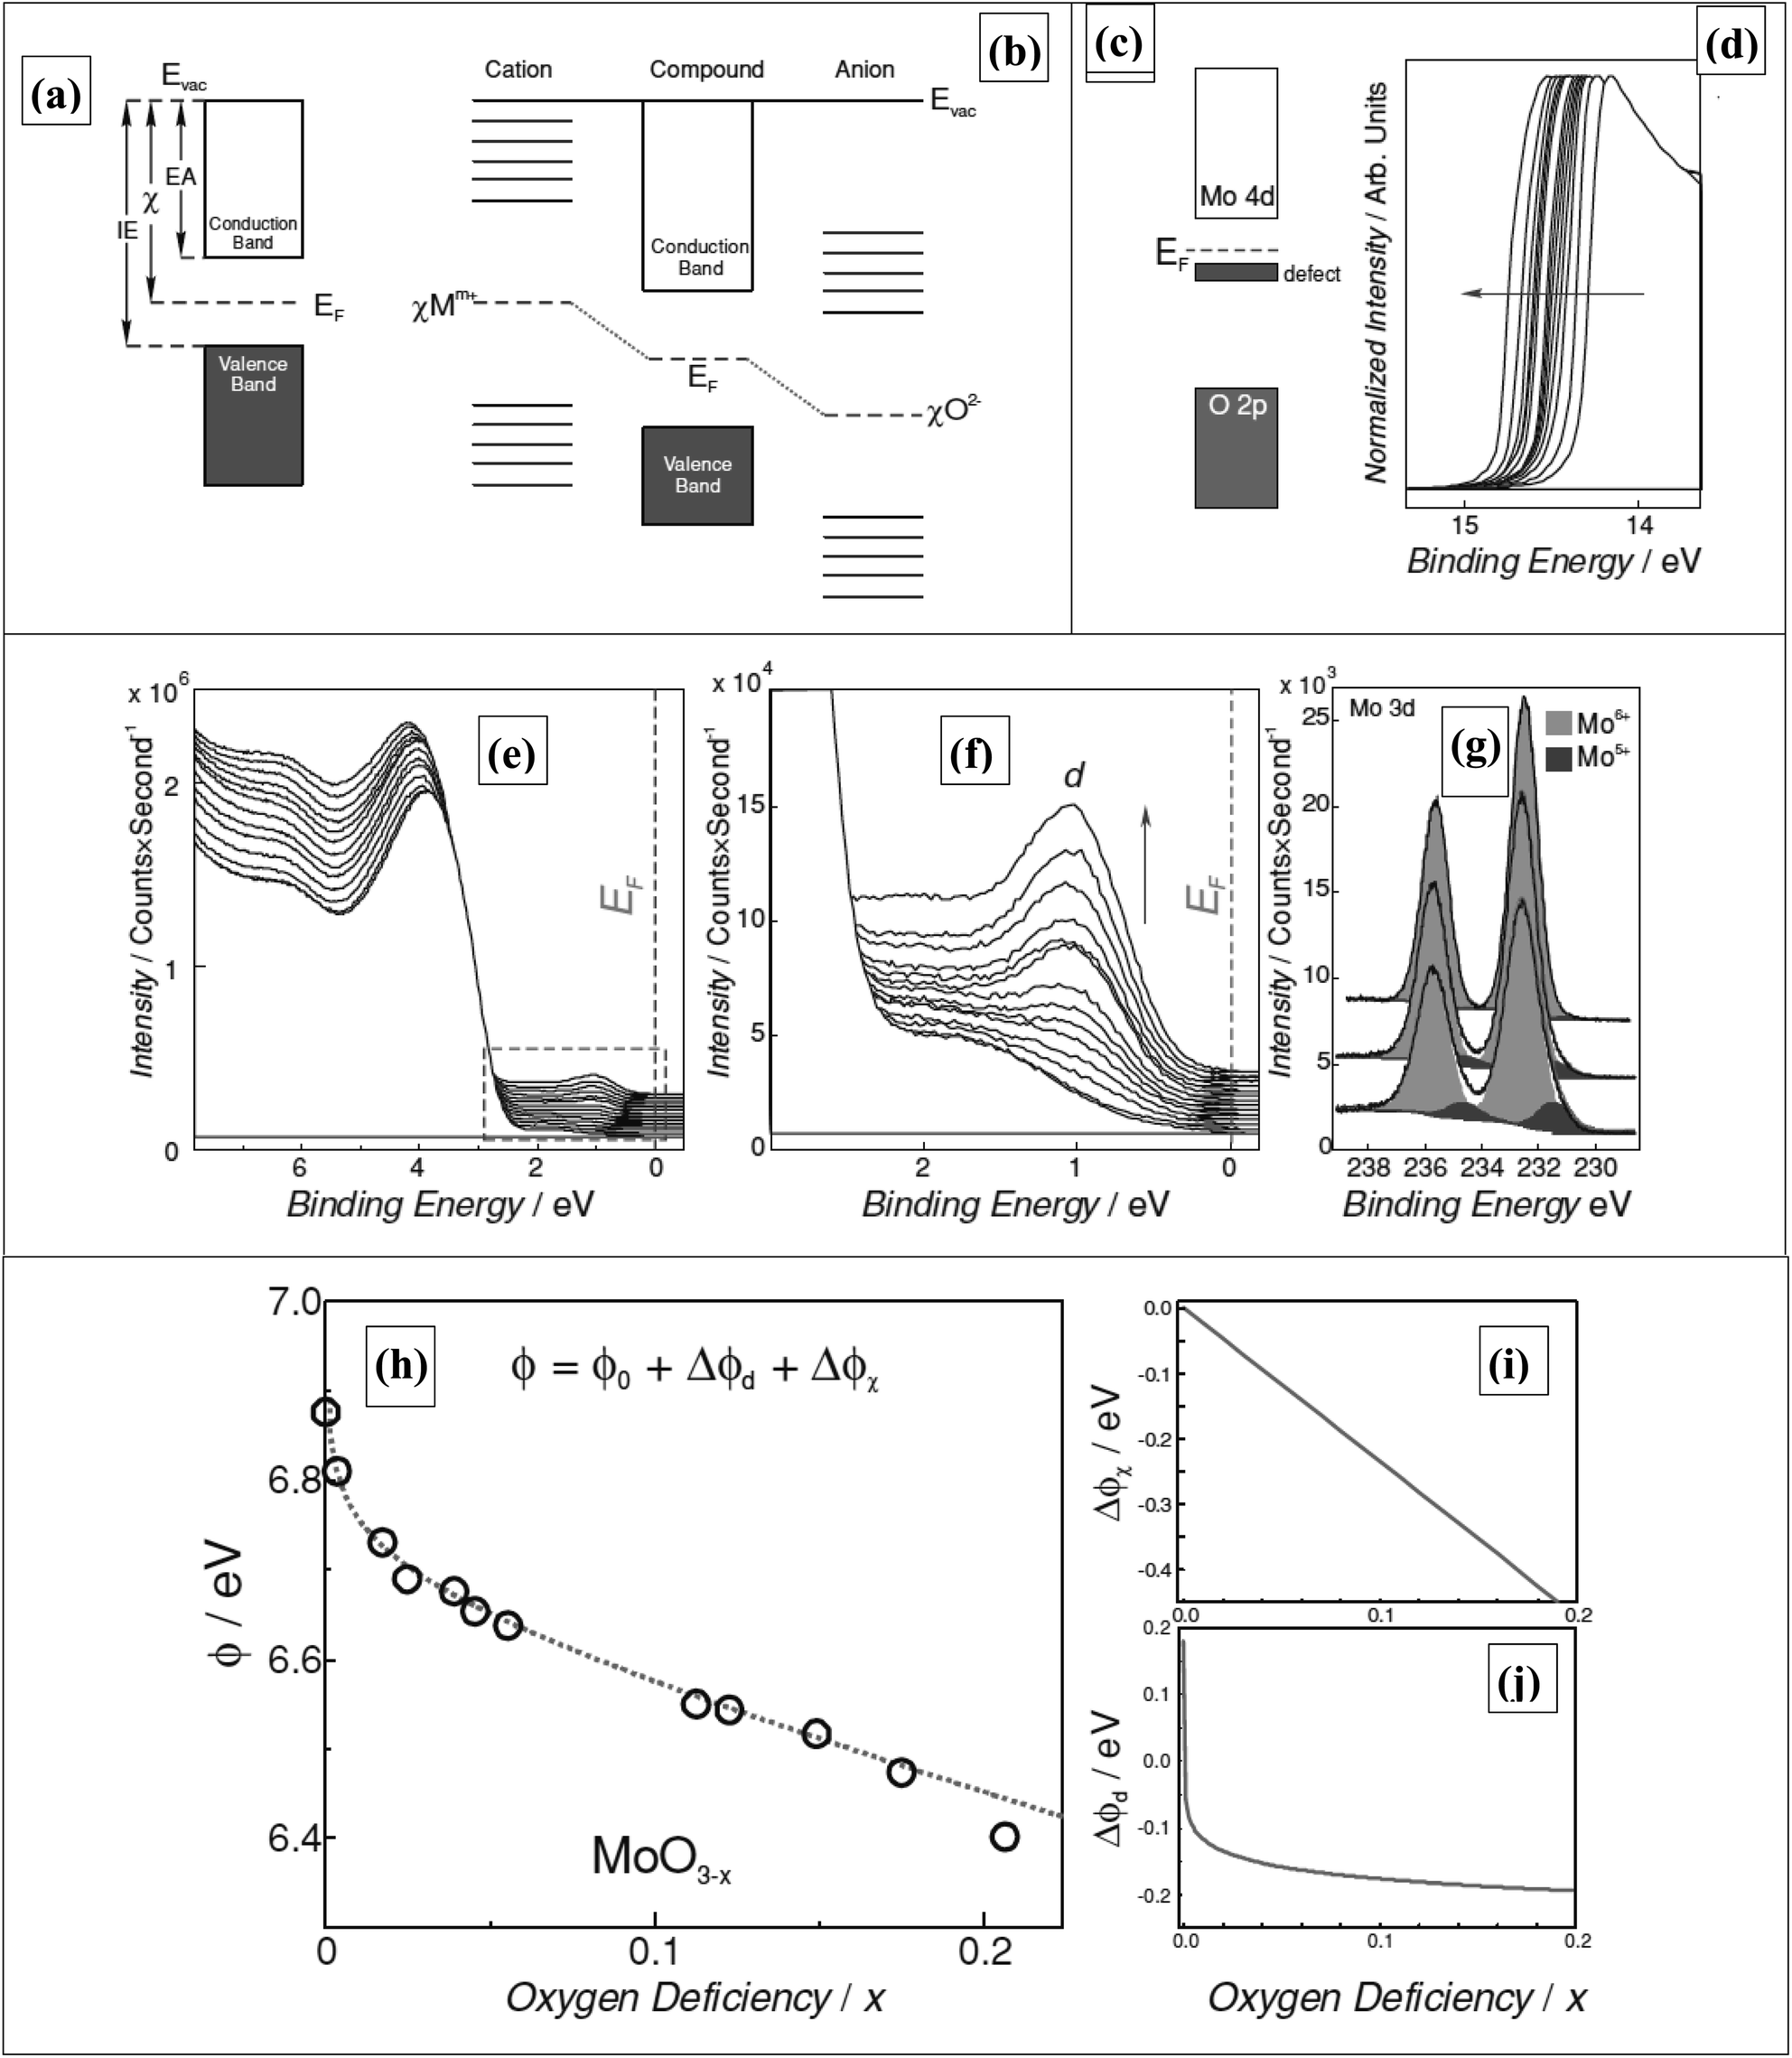 Defect engineering in photocatalysis: formation, chemistry,  optoelectronics, and interface studies - Journal of Materials Chemistry A  (RSC Publishing) DOI:10.1039/D0TA04297H